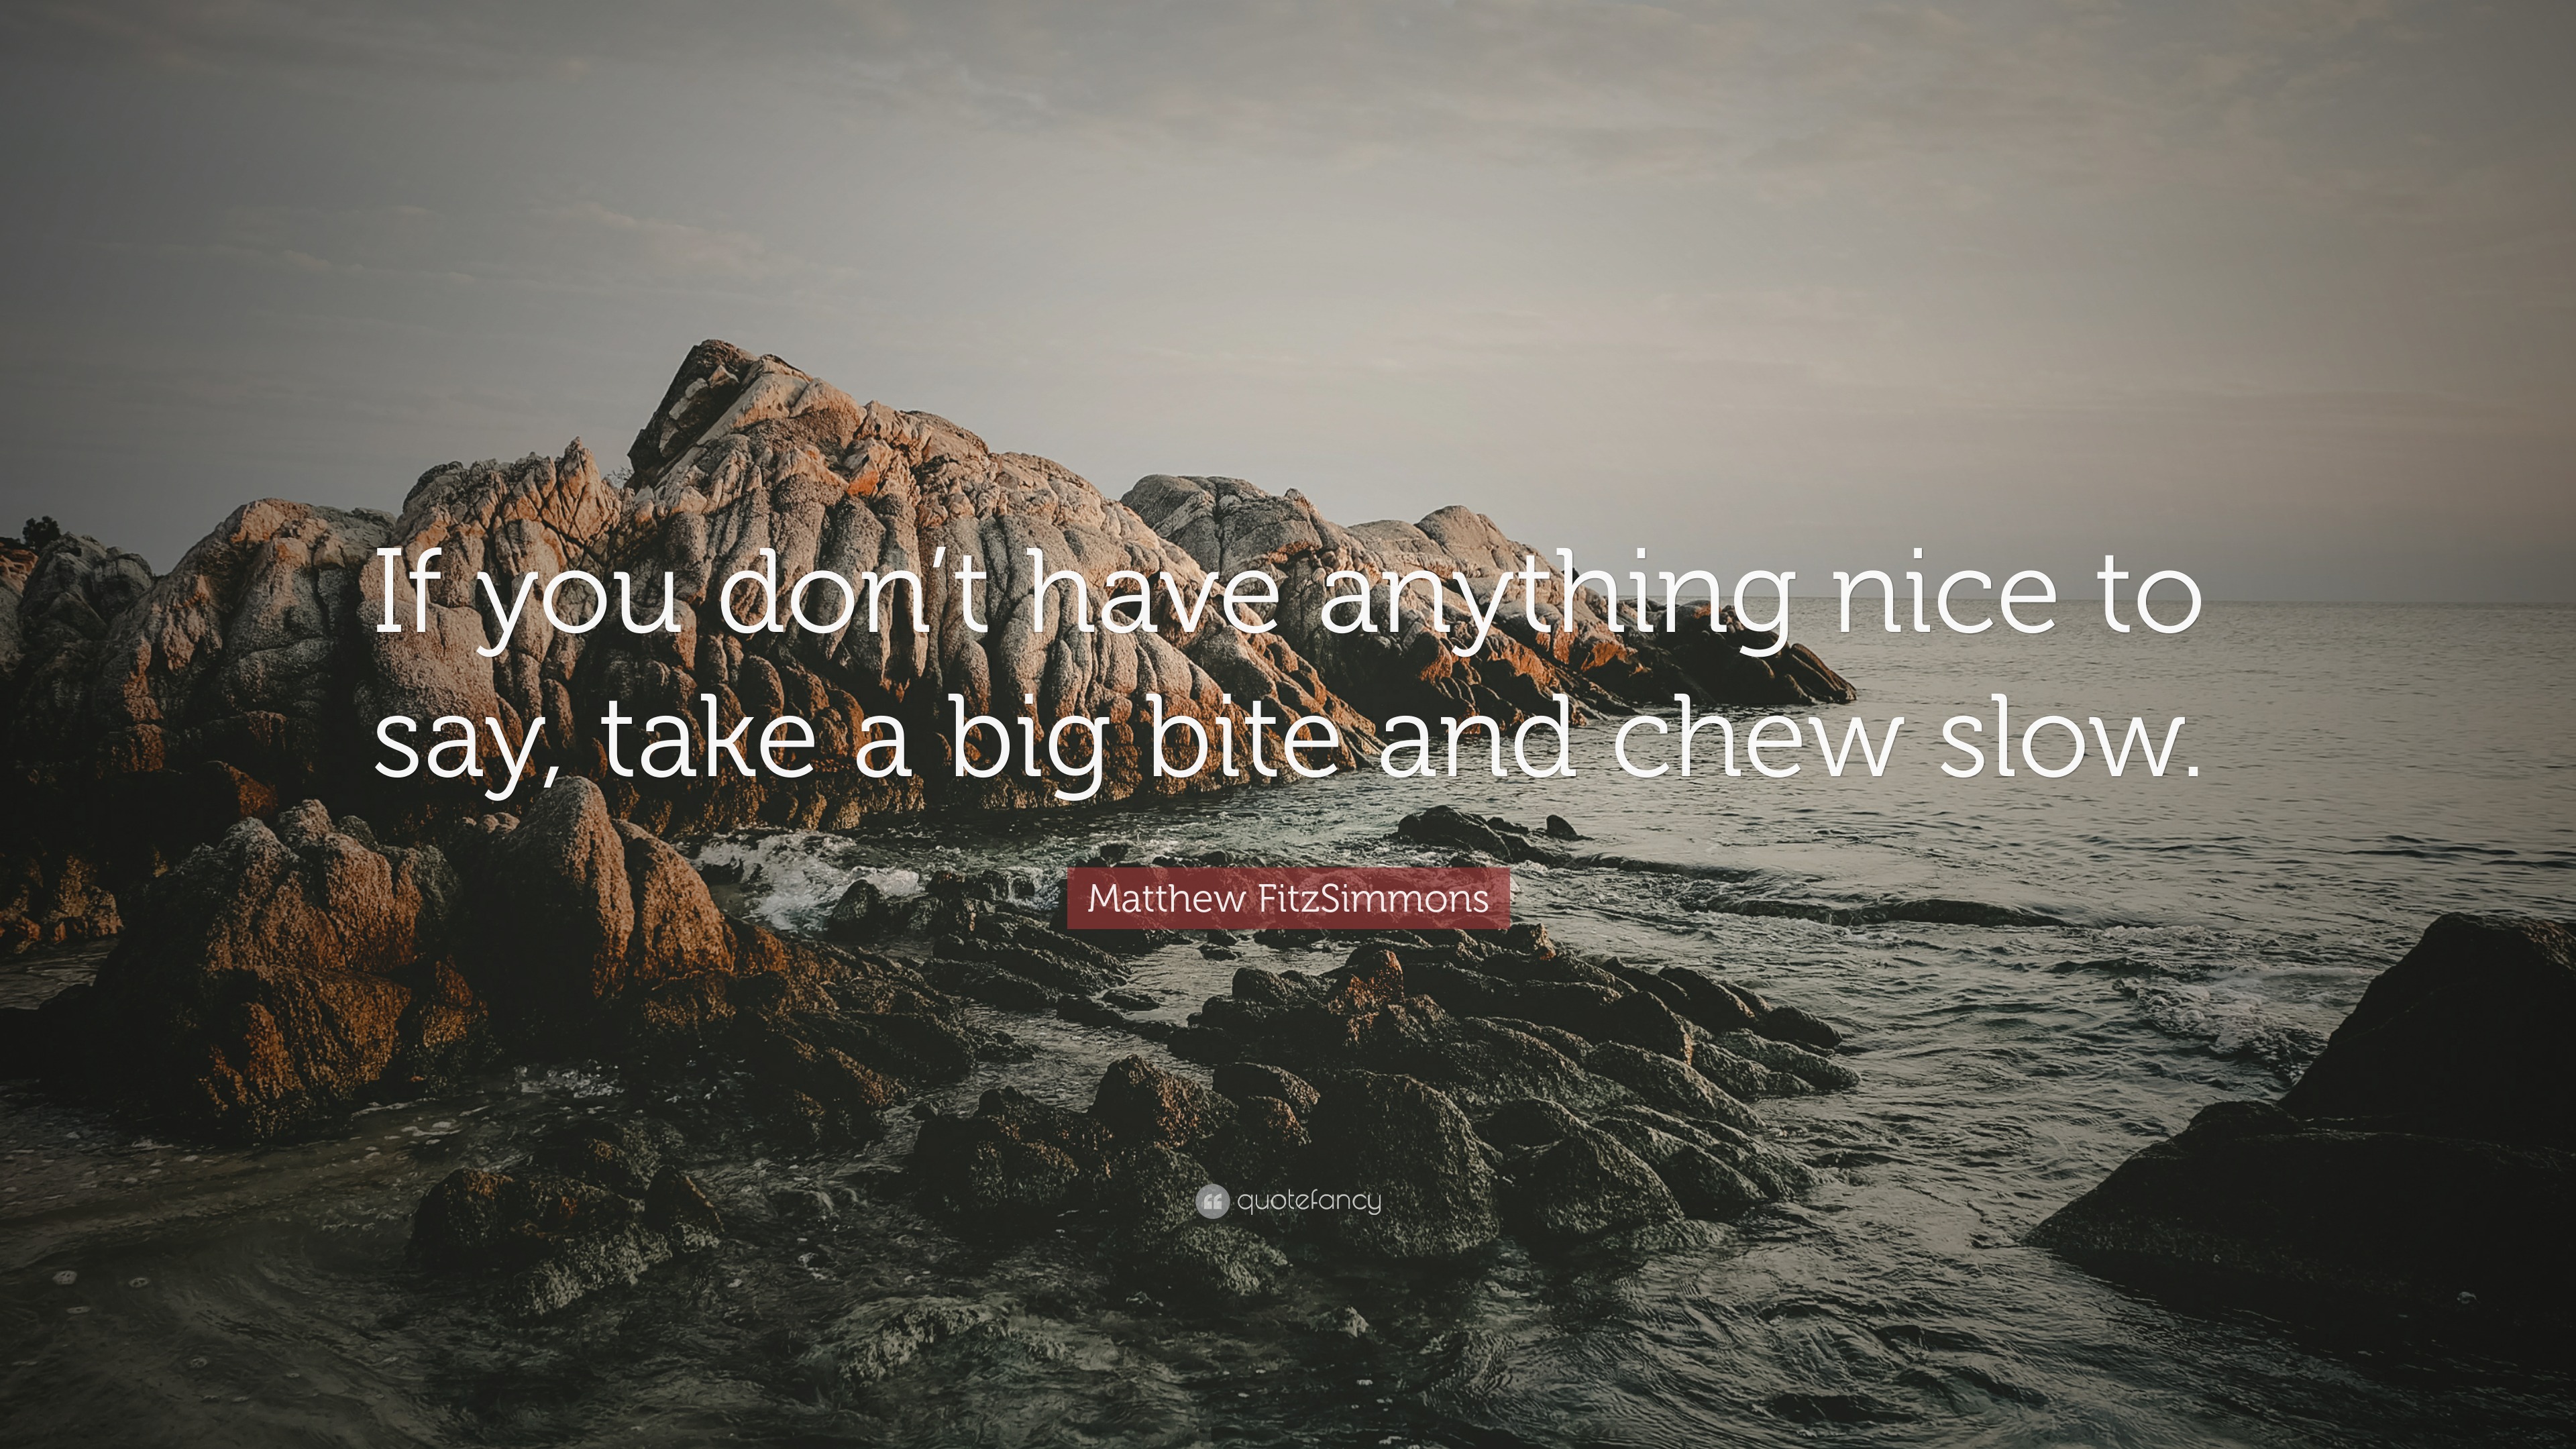 https://quotefancy.com/media/wallpaper/3840x2160/6448244-Matthew-FitzSimmons-Quote-If-you-don-t-have-anything-nice-to-say.jpg